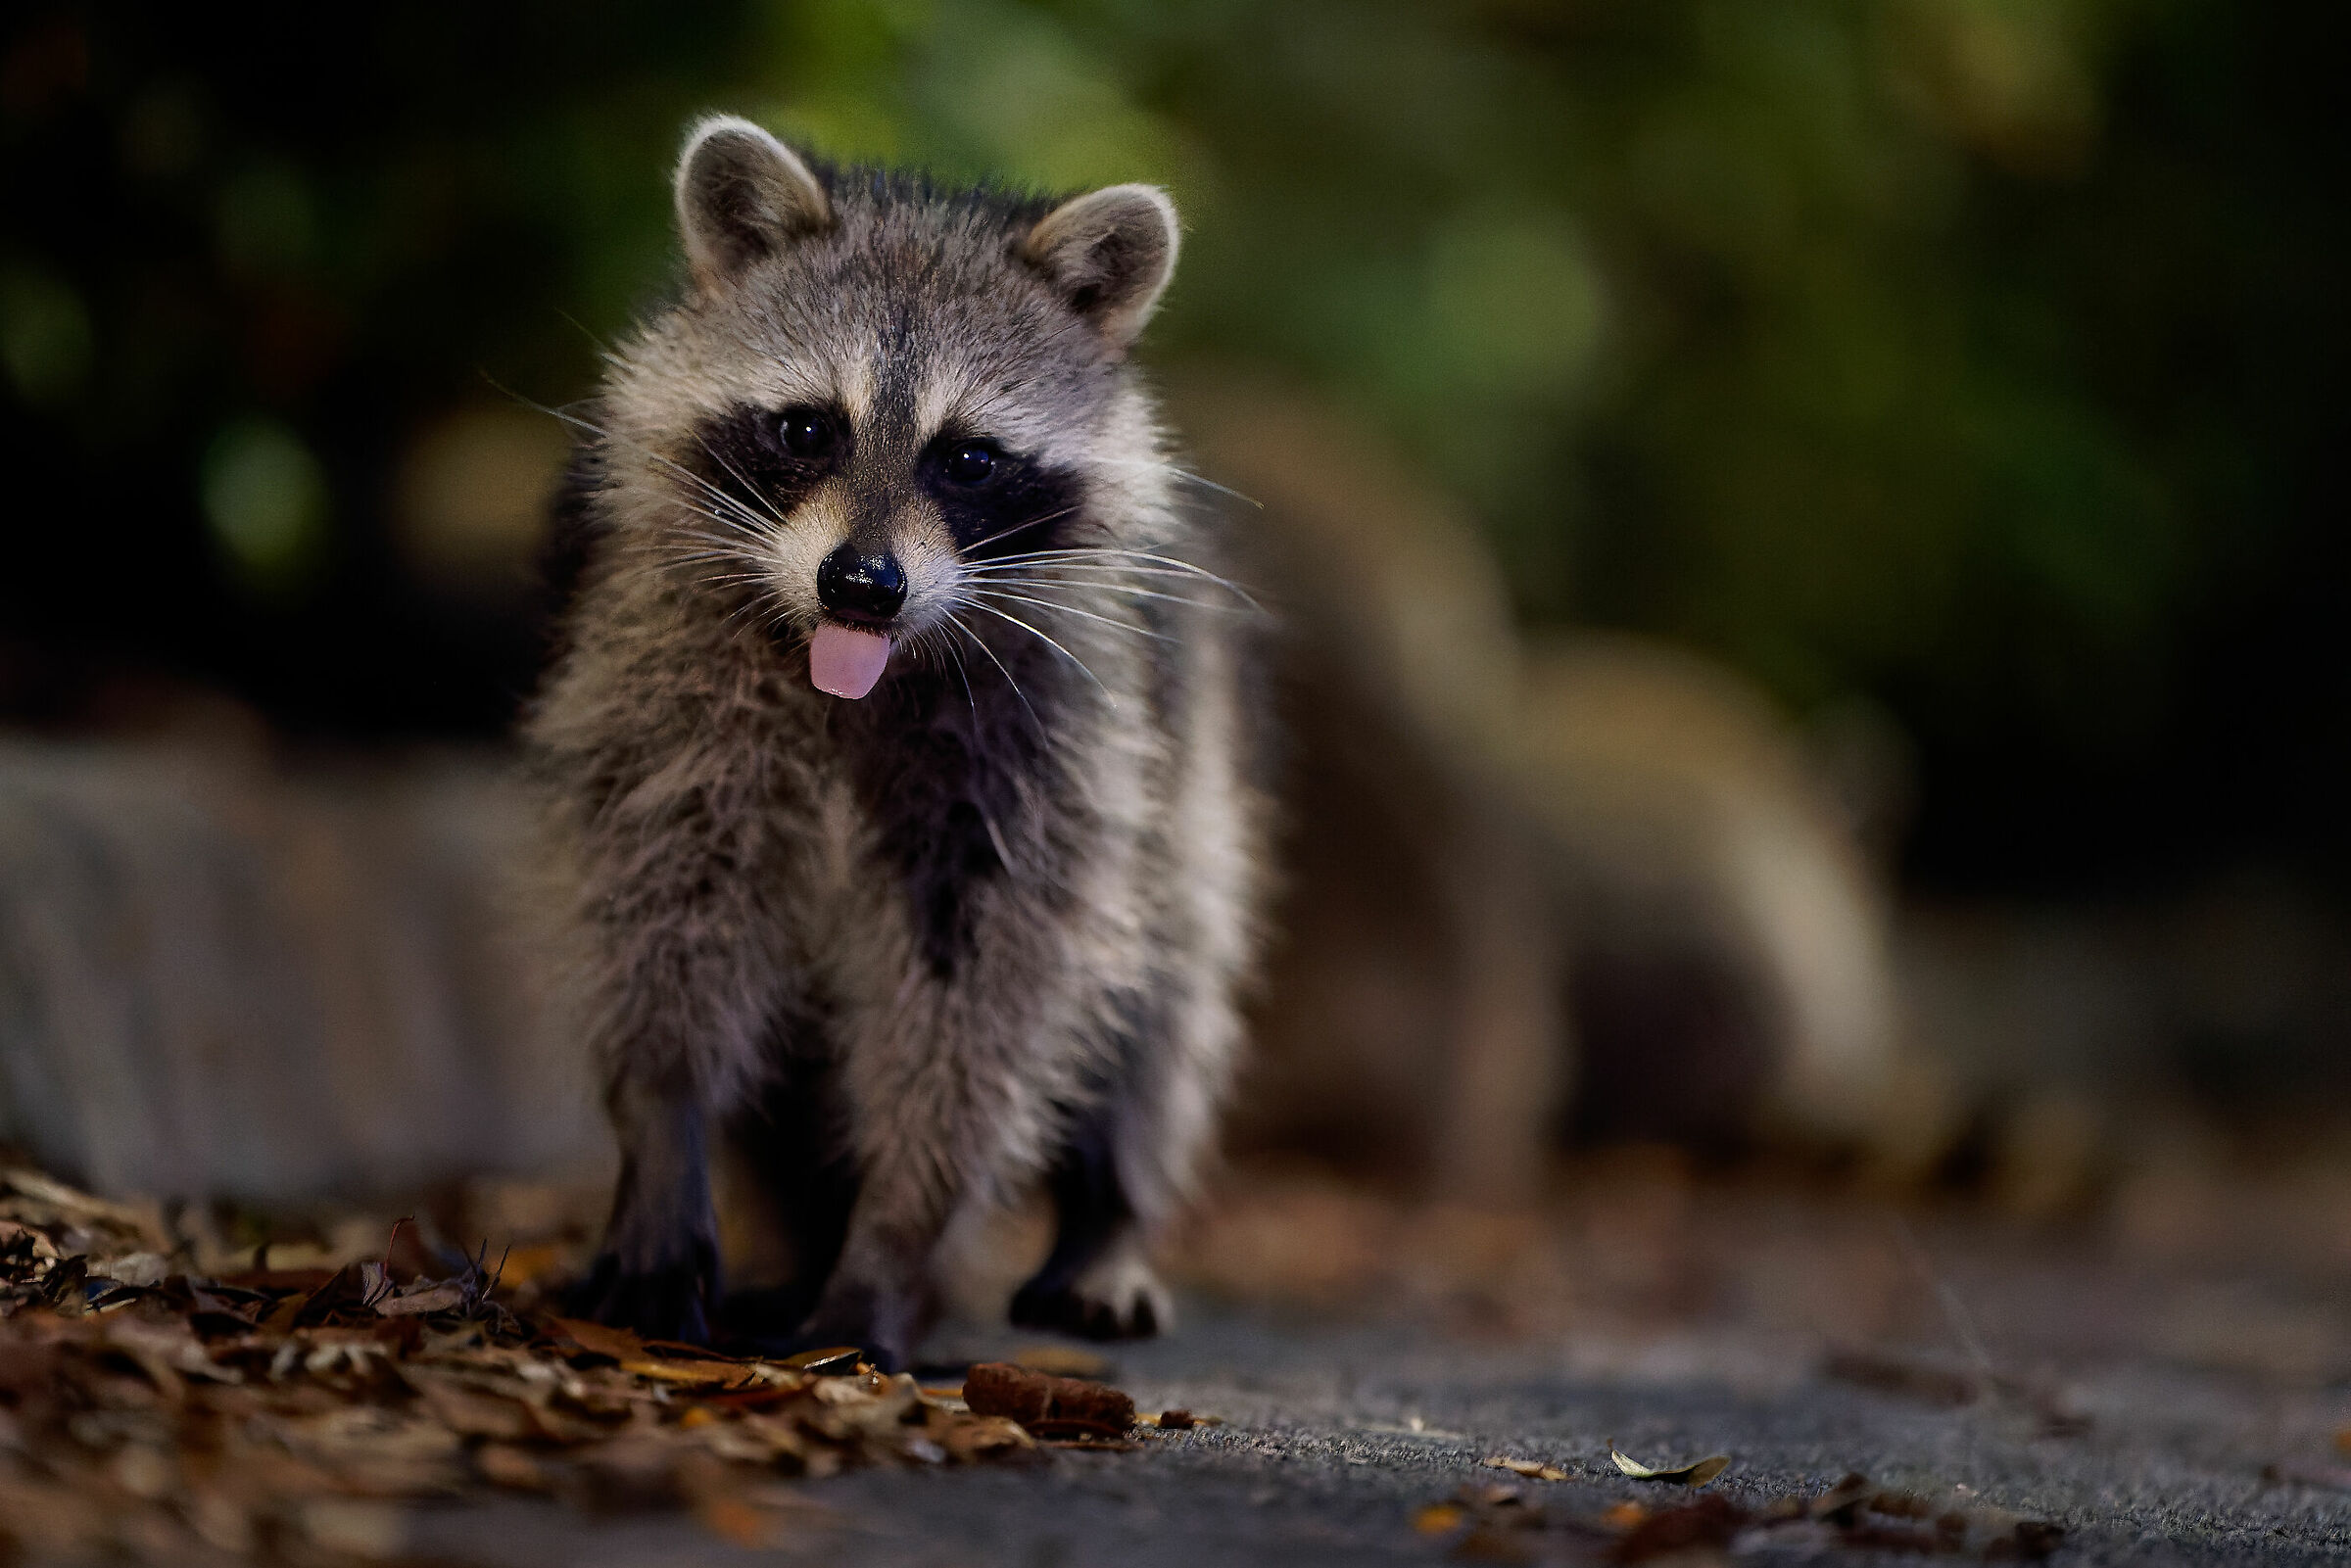 The unmatched cuteness of raccoons...